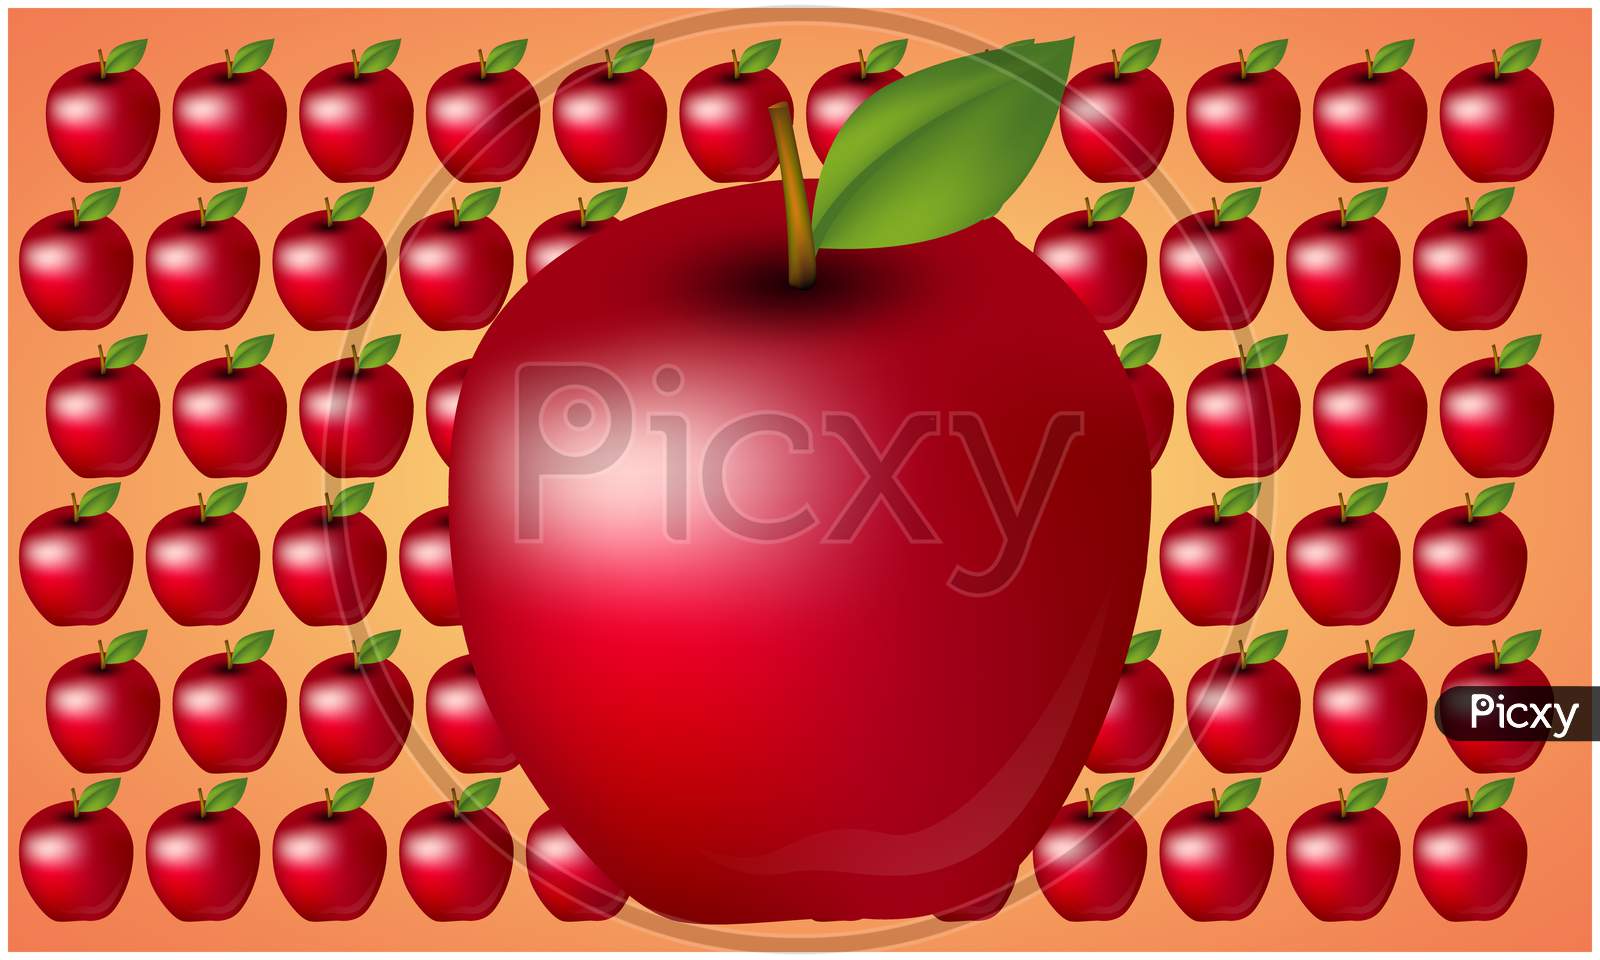 Mock Up Illustration Of Realistic Apple On Abstract Background